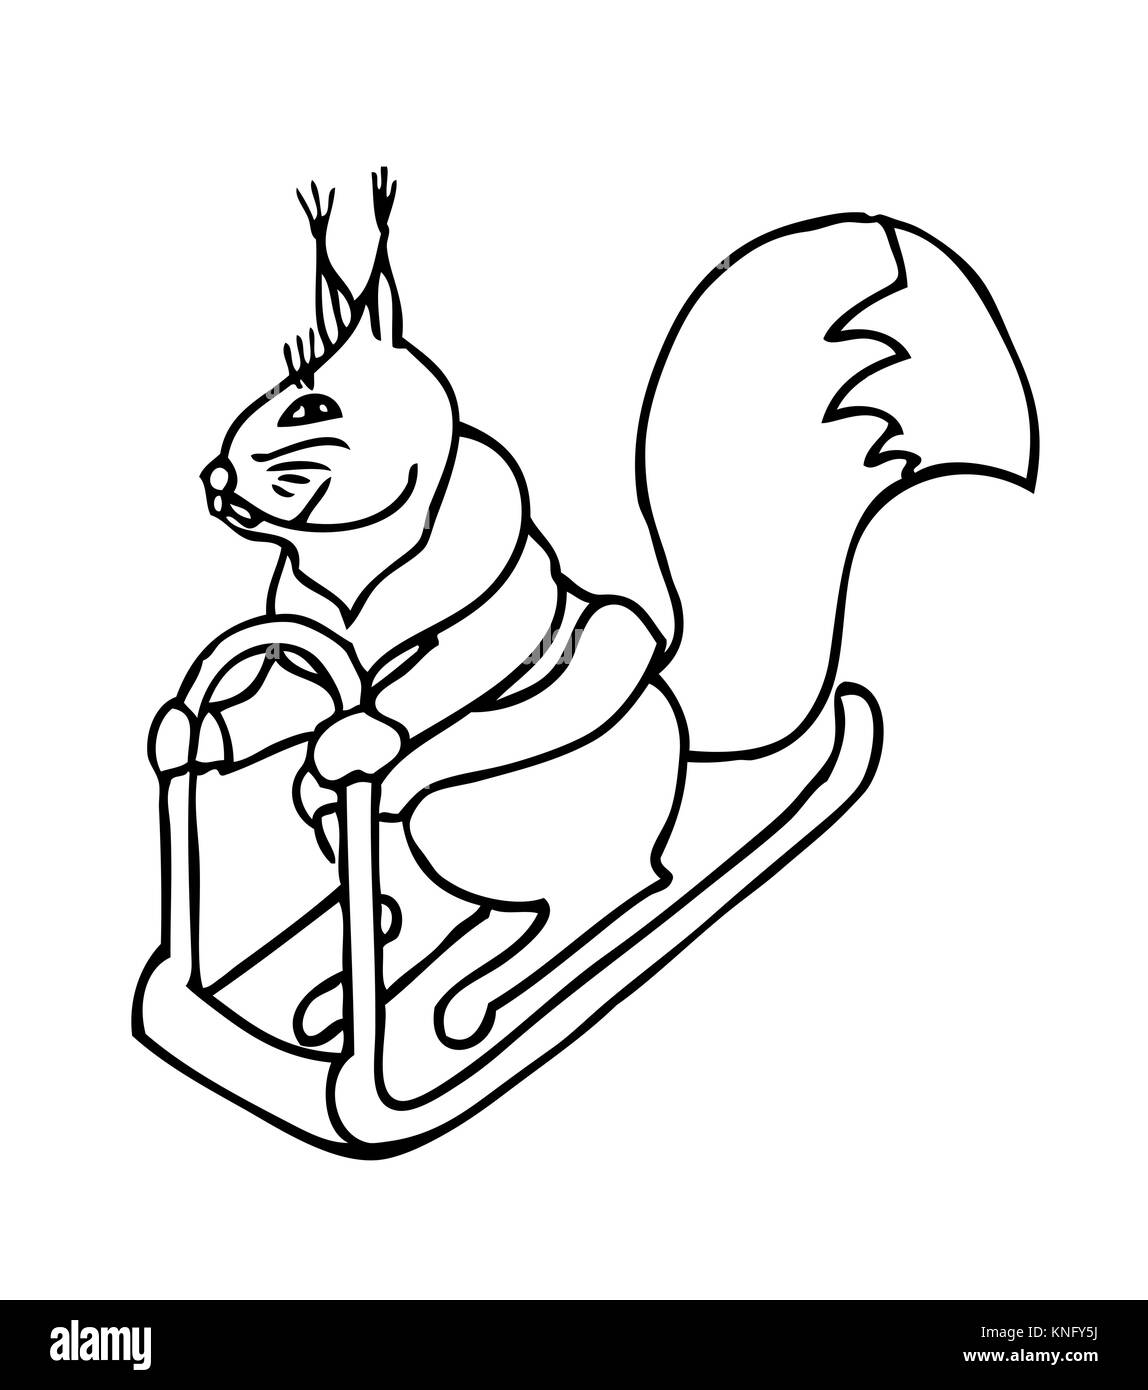 squirrel on a sled Stock Vector